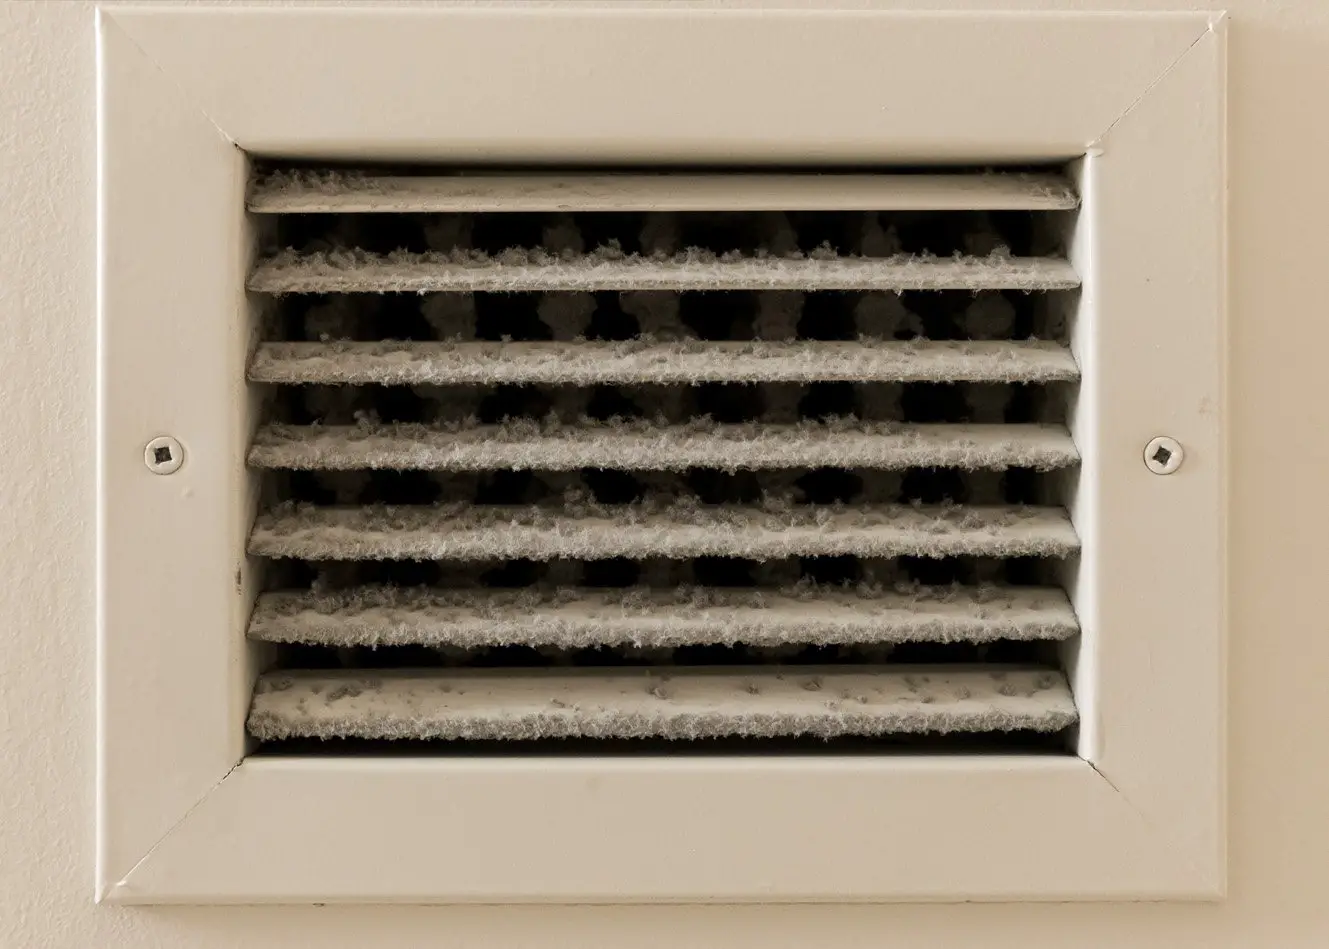 How to Recognize the Smell of Mold From an AC